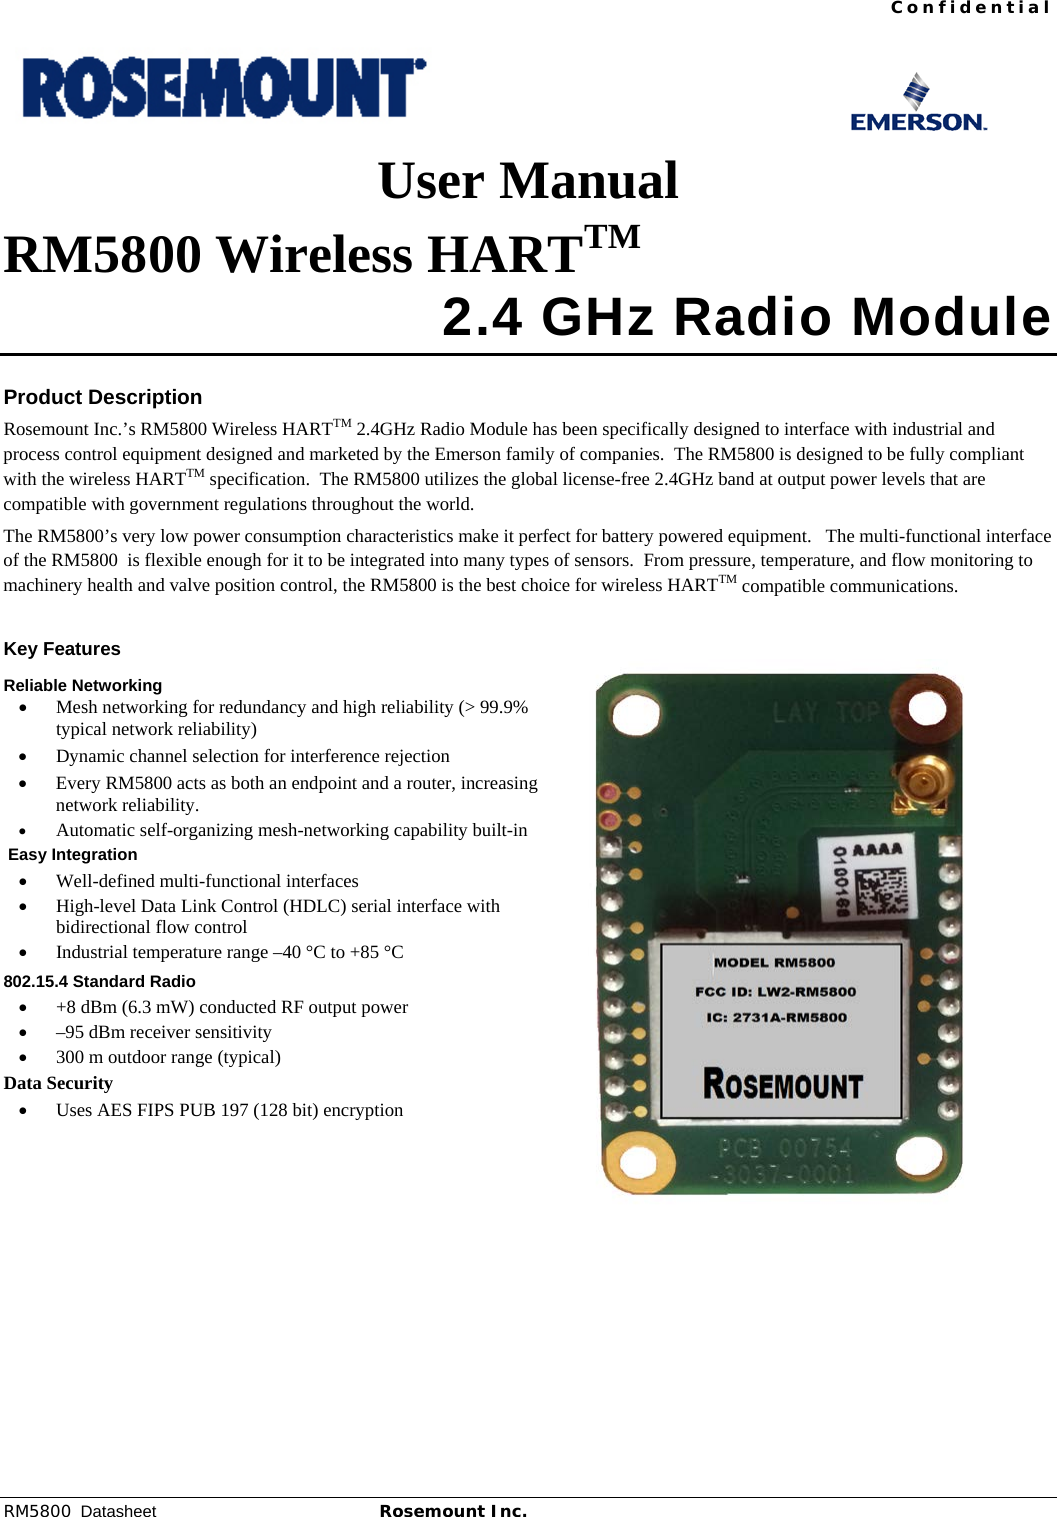  Confidential RM5800  Datasheet Rosemount Inc. 1         User Manual RM5800 Wireless HARTTM  2.4 GHz Radio Module  Product Description Rosemount Inc.’s RM5800 Wireless HARTTM 2.4GHz Radio Module has been specifically designed to interface with industrial and process control equipment designed and marketed by the Emerson family of companies.  The RM5800 is designed to be fully compliant with the wireless HARTTM specification.  The RM5800 utilizes the global license-free 2.4GHz band at output power levels that are compatible with government regulations throughout the world. The RM5800’s very low power consumption characteristics make it perfect for battery powered equipment.   The multi-functional interface of the RM5800  is flexible enough for it to be integrated into many types of sensors.  From pressure, temperature, and flow monitoring to machinery health and valve position control, the RM5800 is the best choice for wireless HARTTM compatible communications.   Key Features Reliable Networking • Mesh networking for redundancy and high reliability (&gt; 99.9% typical network reliability) • Dynamic channel selection for interference rejection • Every RM5800 acts as both an endpoint and a router, increasing network reliability. • Automatic self-organizing mesh-networking capability built-in  Easy Integration • Well-defined multi-functional interfaces • High-level Data Link Control (HDLC) serial interface with bidirectional flow control • Industrial temperature range –40 °C to +85 °C 802.15.4 Standard Radio • +8 dBm (6.3 mW) conducted RF output power  • –95 dBm receiver sensitivity • 300 m outdoor range (typical) Data Security • Uses AES FIPS PUB 197 (128 bit) encryption     